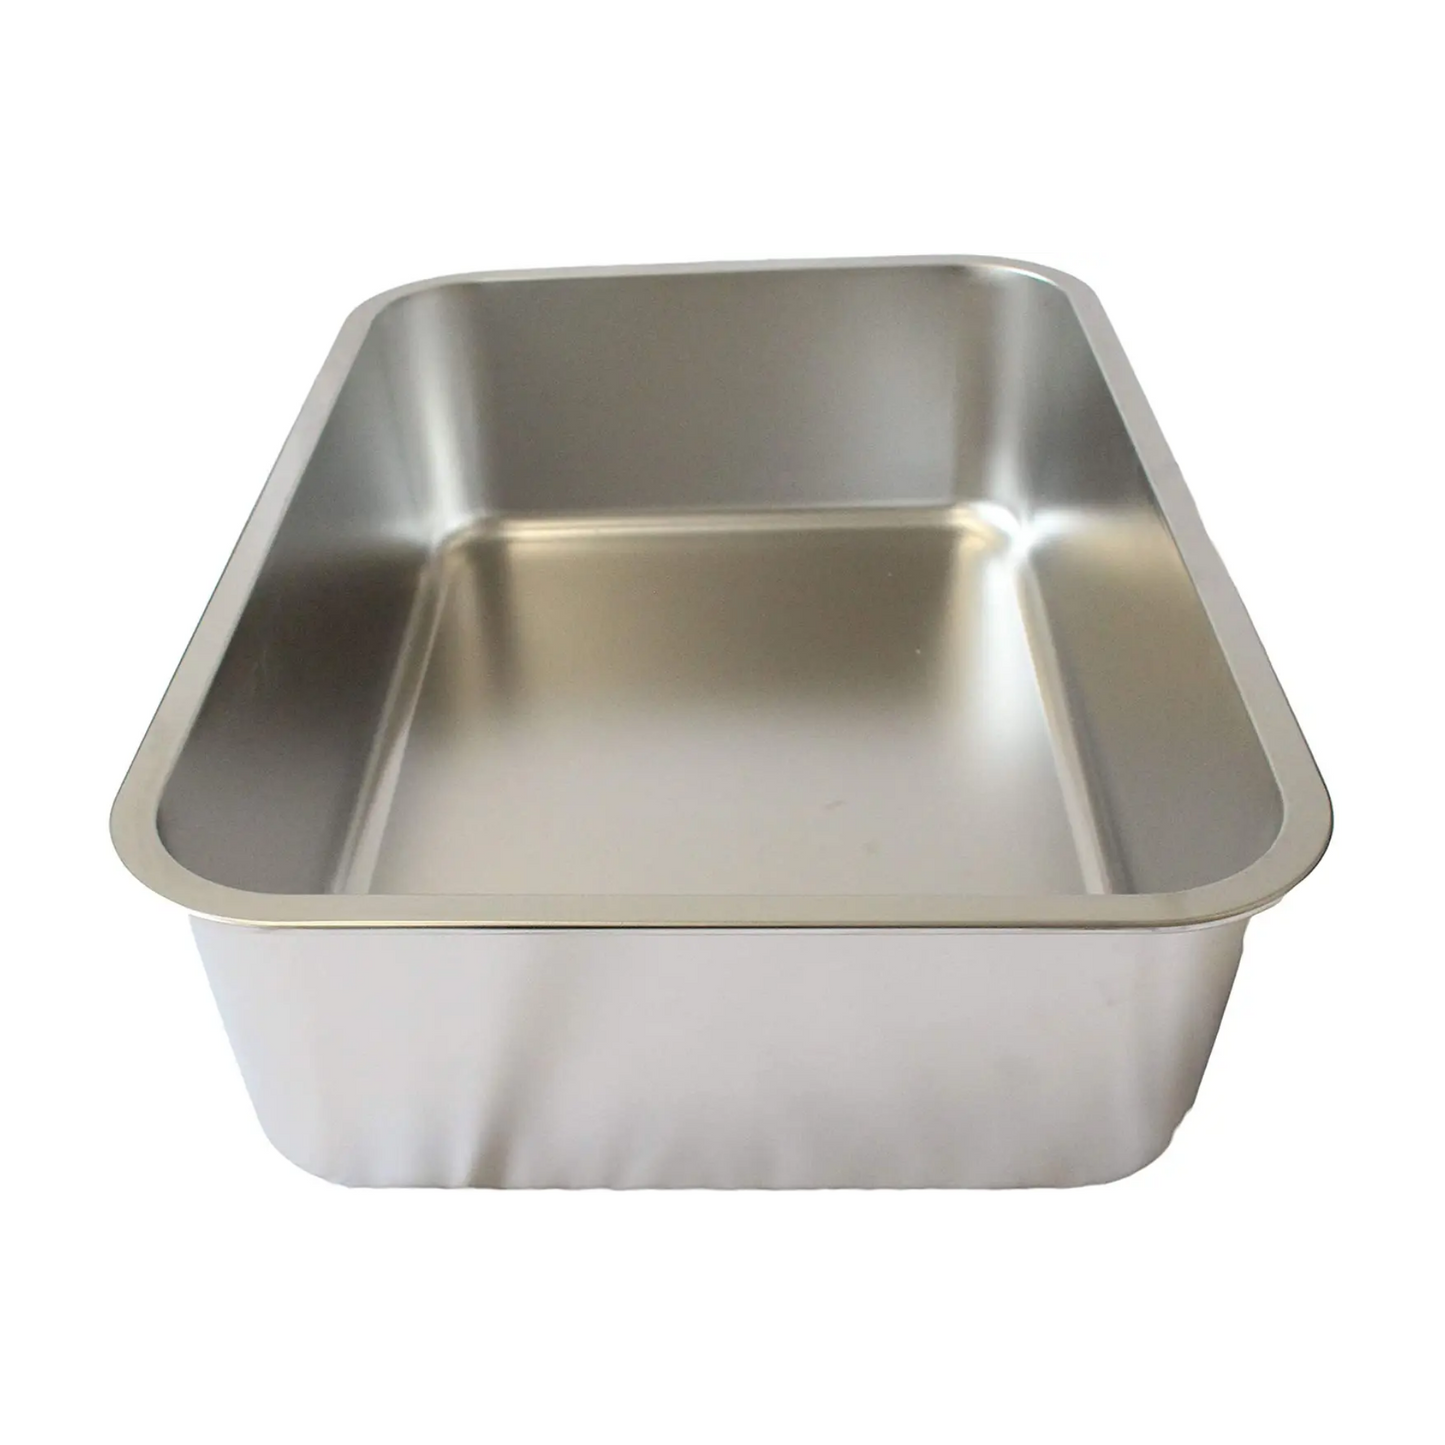 Midlee Stainless Steel Cat Litter Box- XL Size- 23.5" x 15.5" x 5.75"